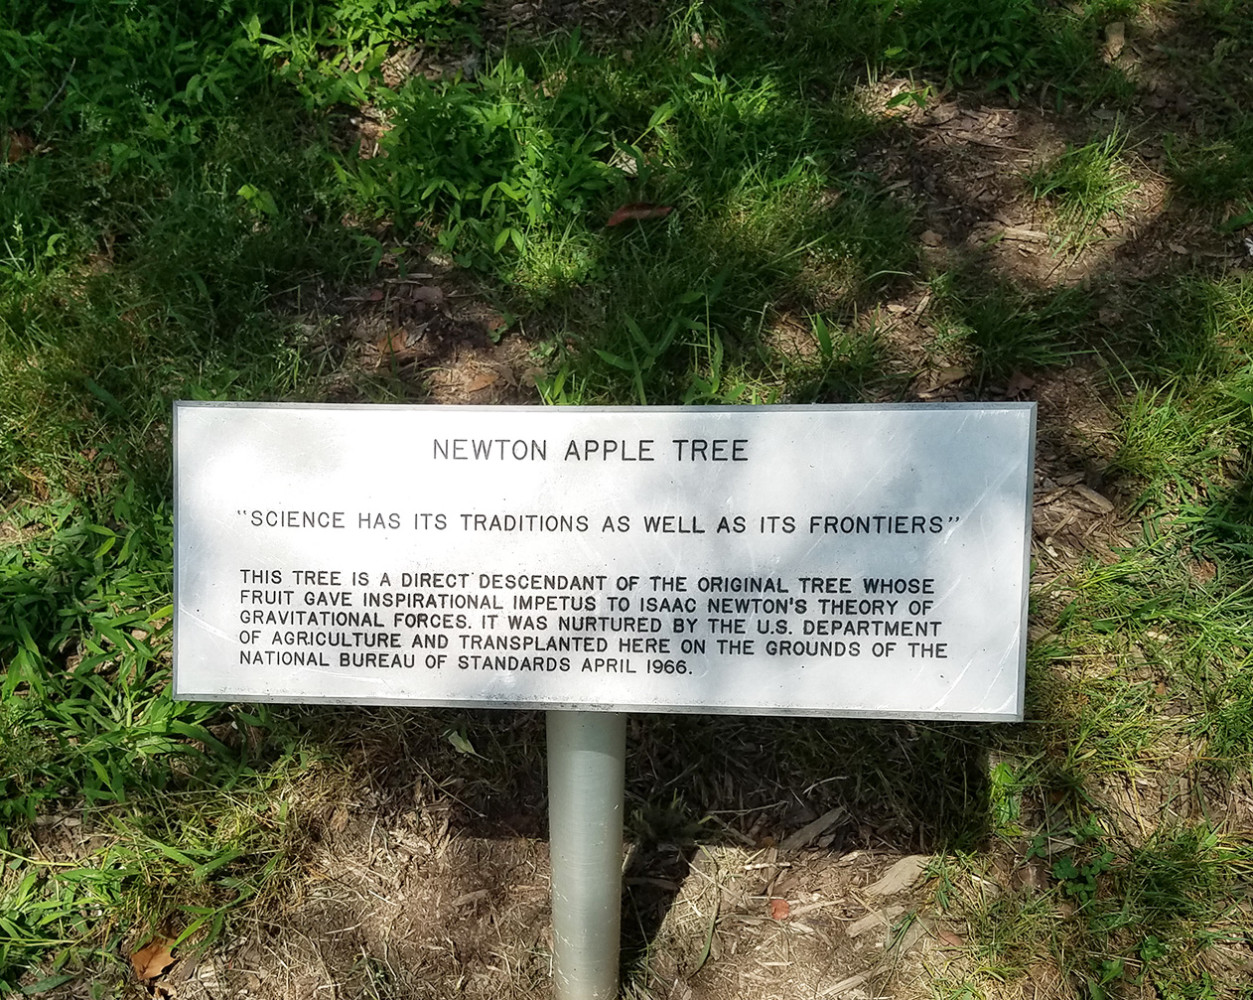 A sign on the grounds of NIST commemorates the clone of a Newton Apple Tree.